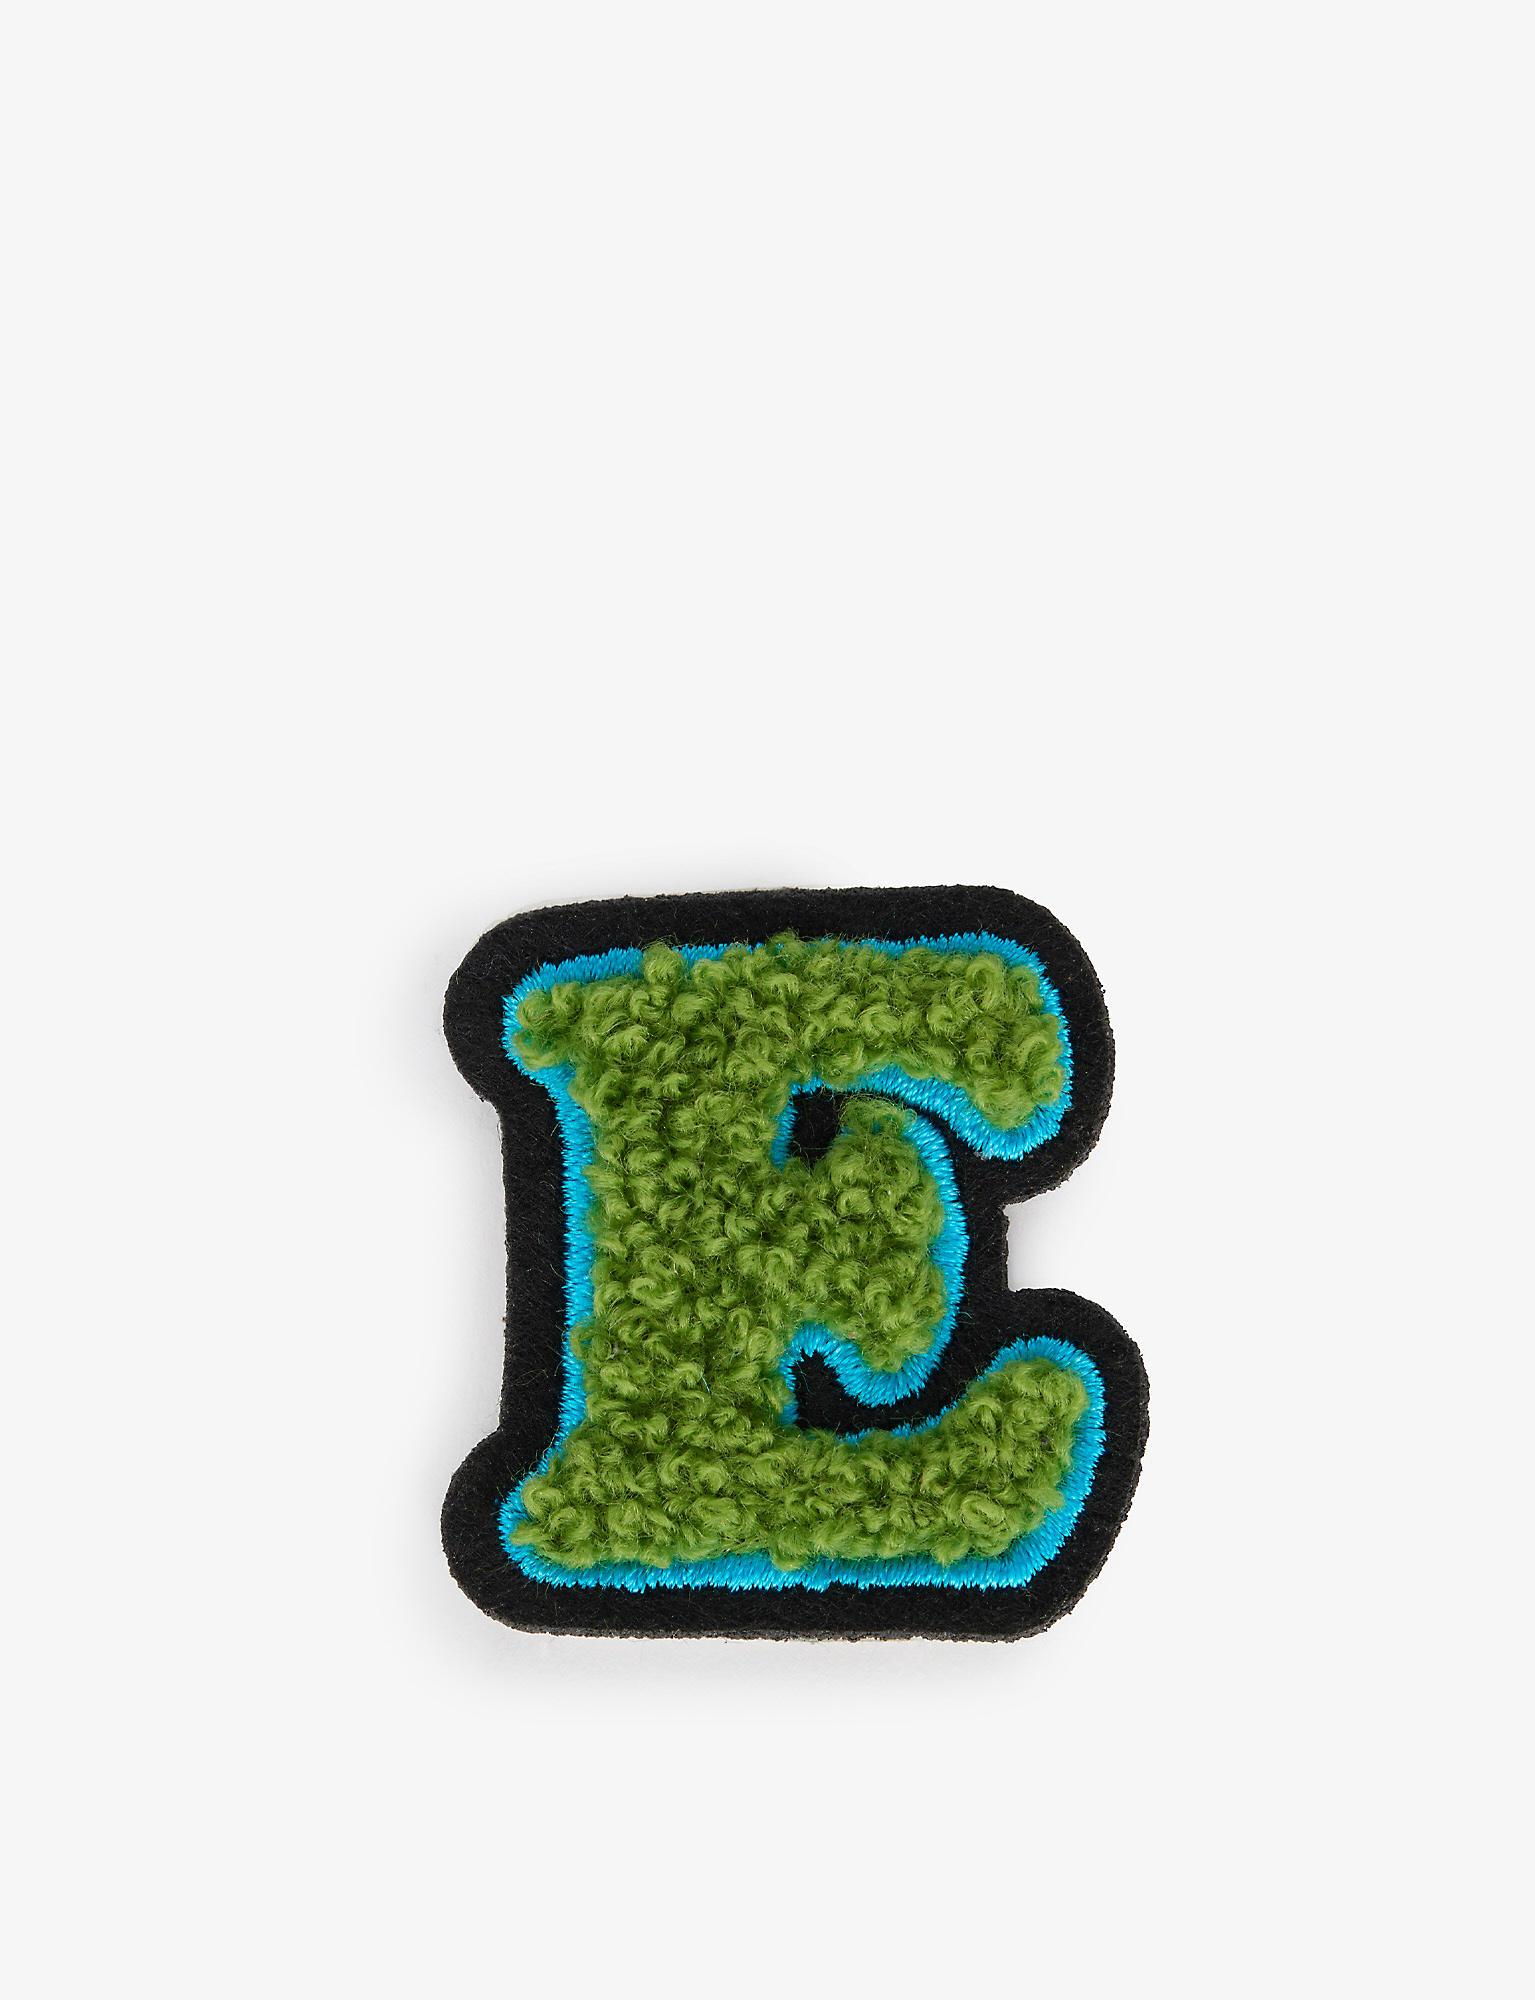 Marc Jacobs - THE Marc Jacobs Alphabet Patches. Made exclusively